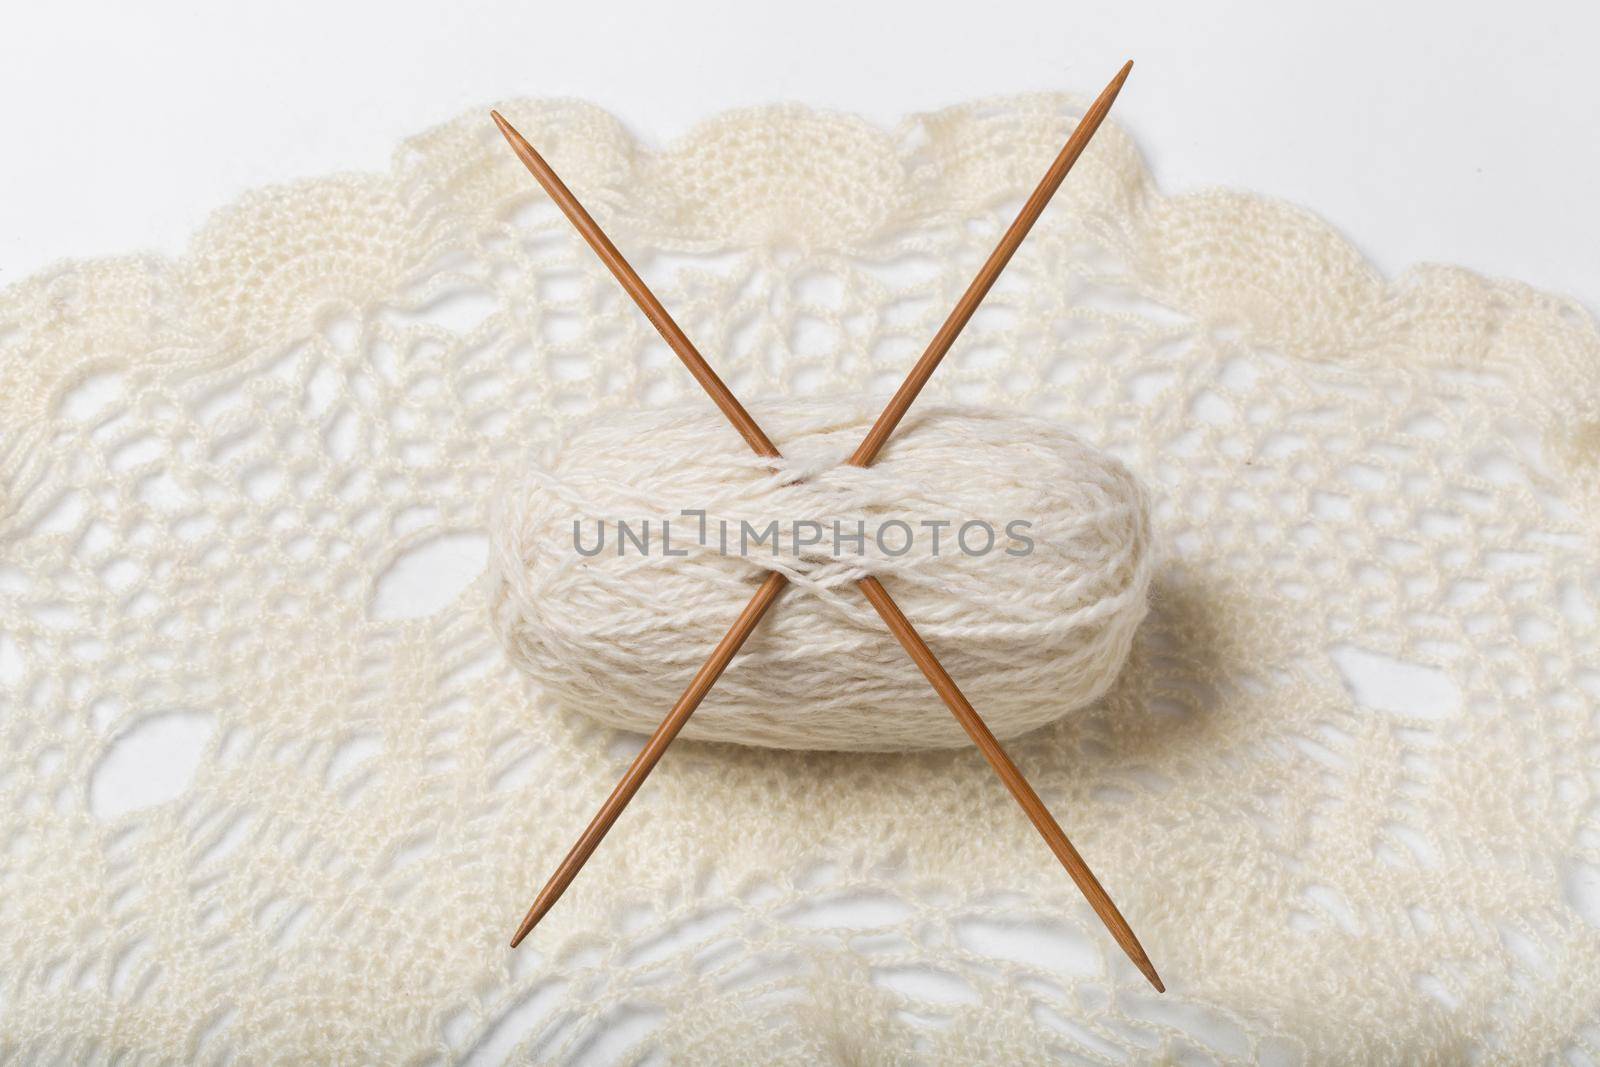 Ball of yarn and knitting by StudioPeace